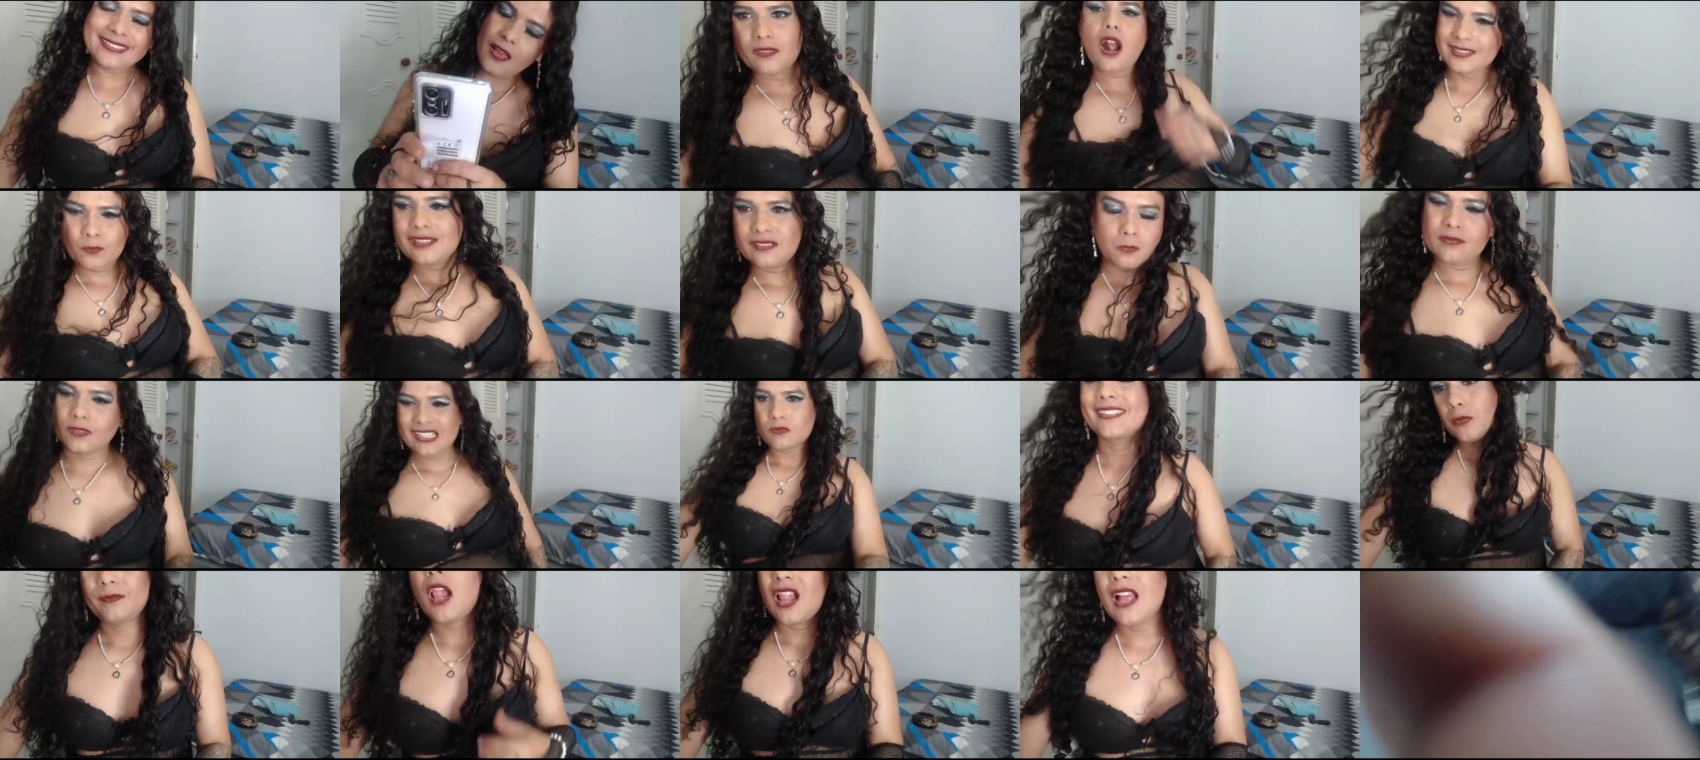 mommycum_69 ts 26-11-2022  trans tits